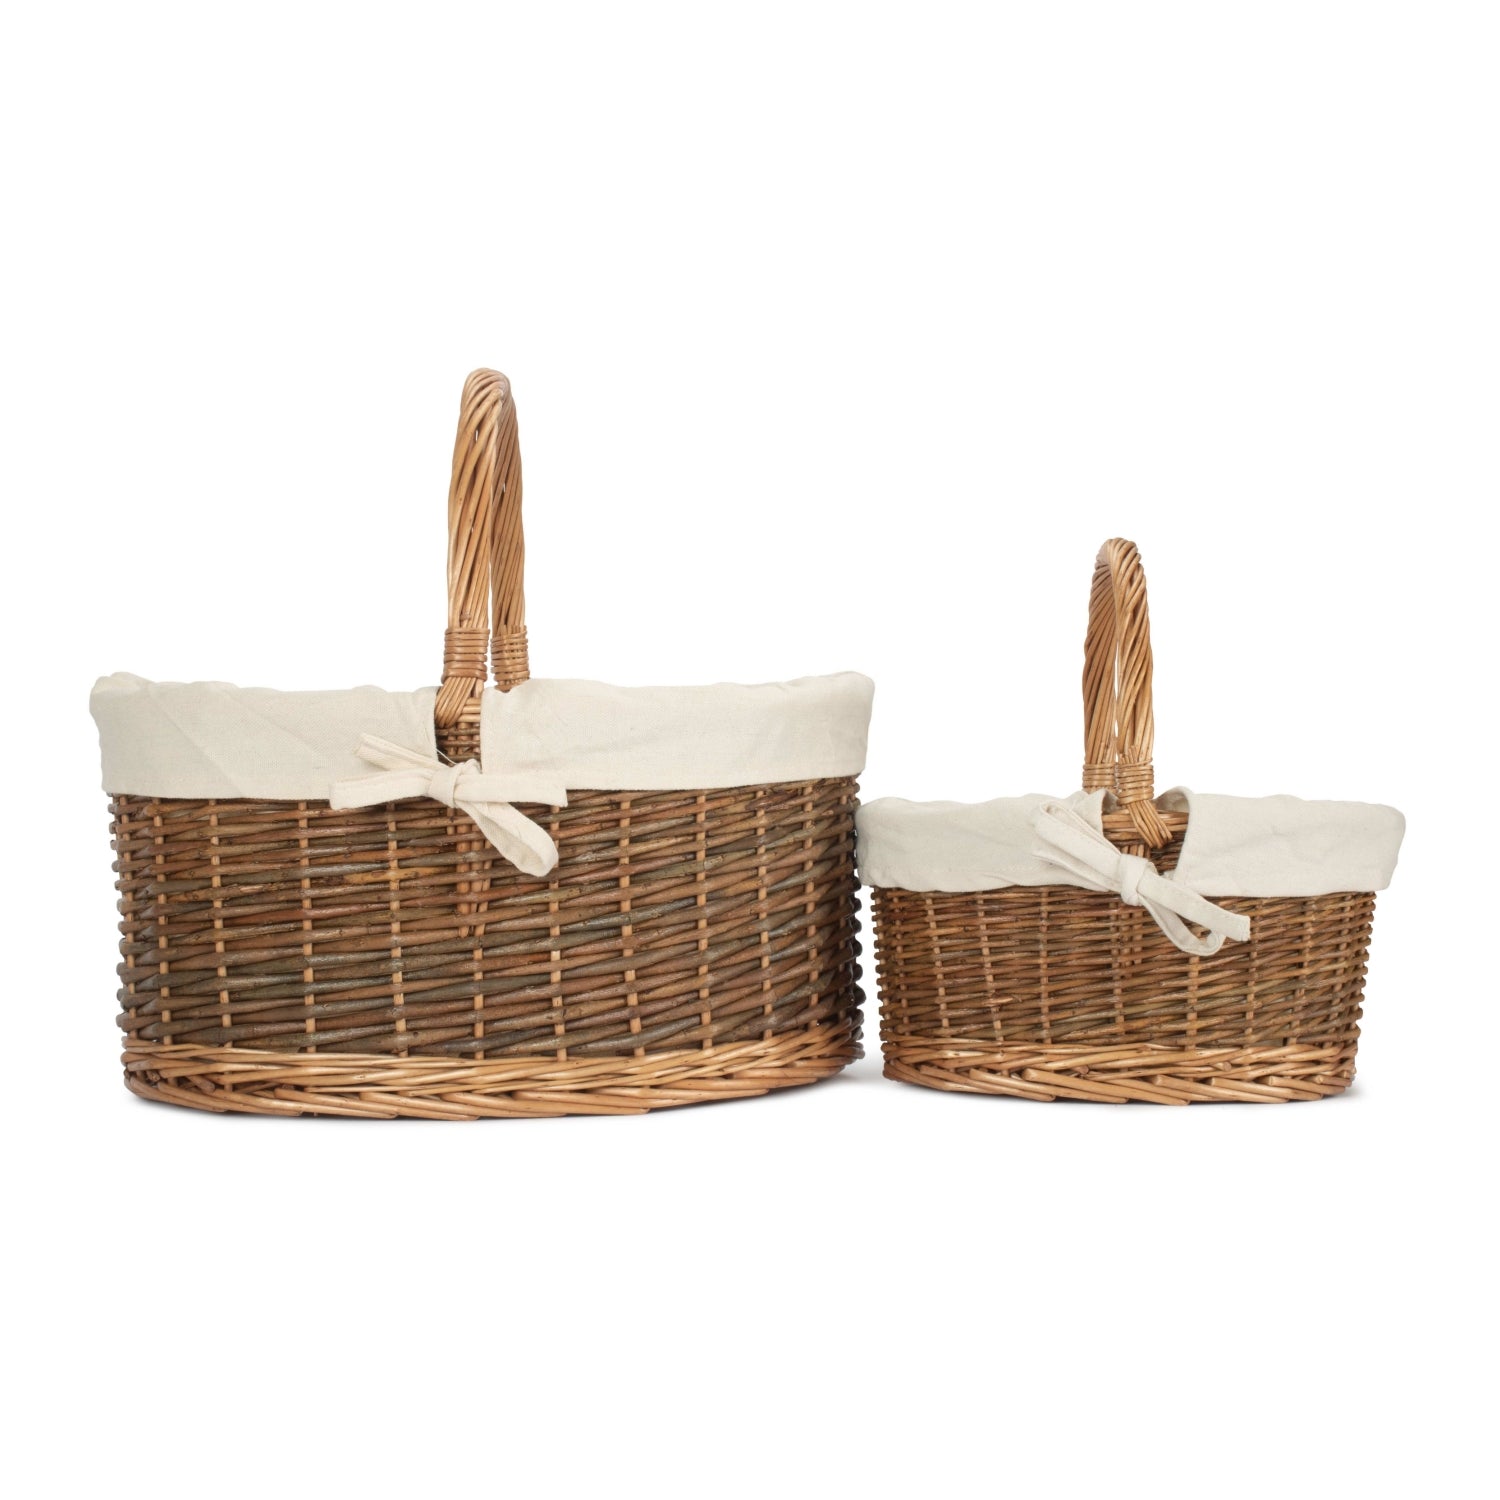 Red Hamper White Lined Country Oval Wicker Shopping Basket